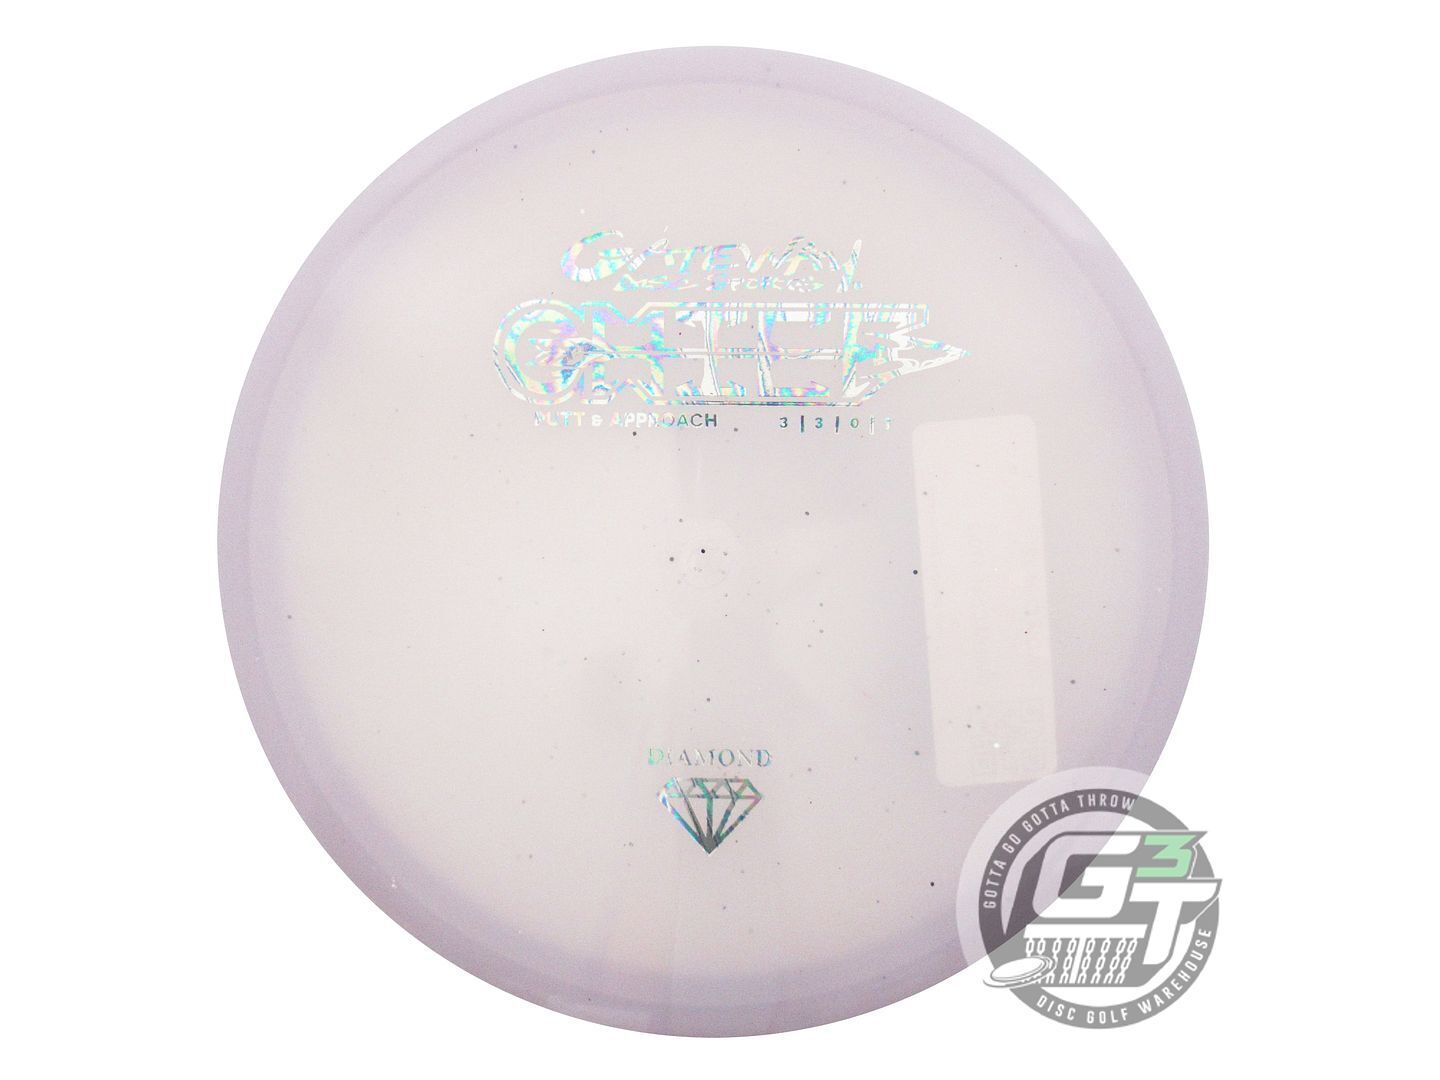 Gateway Diamond Chief Putter Golf Disc (Individually Listed)